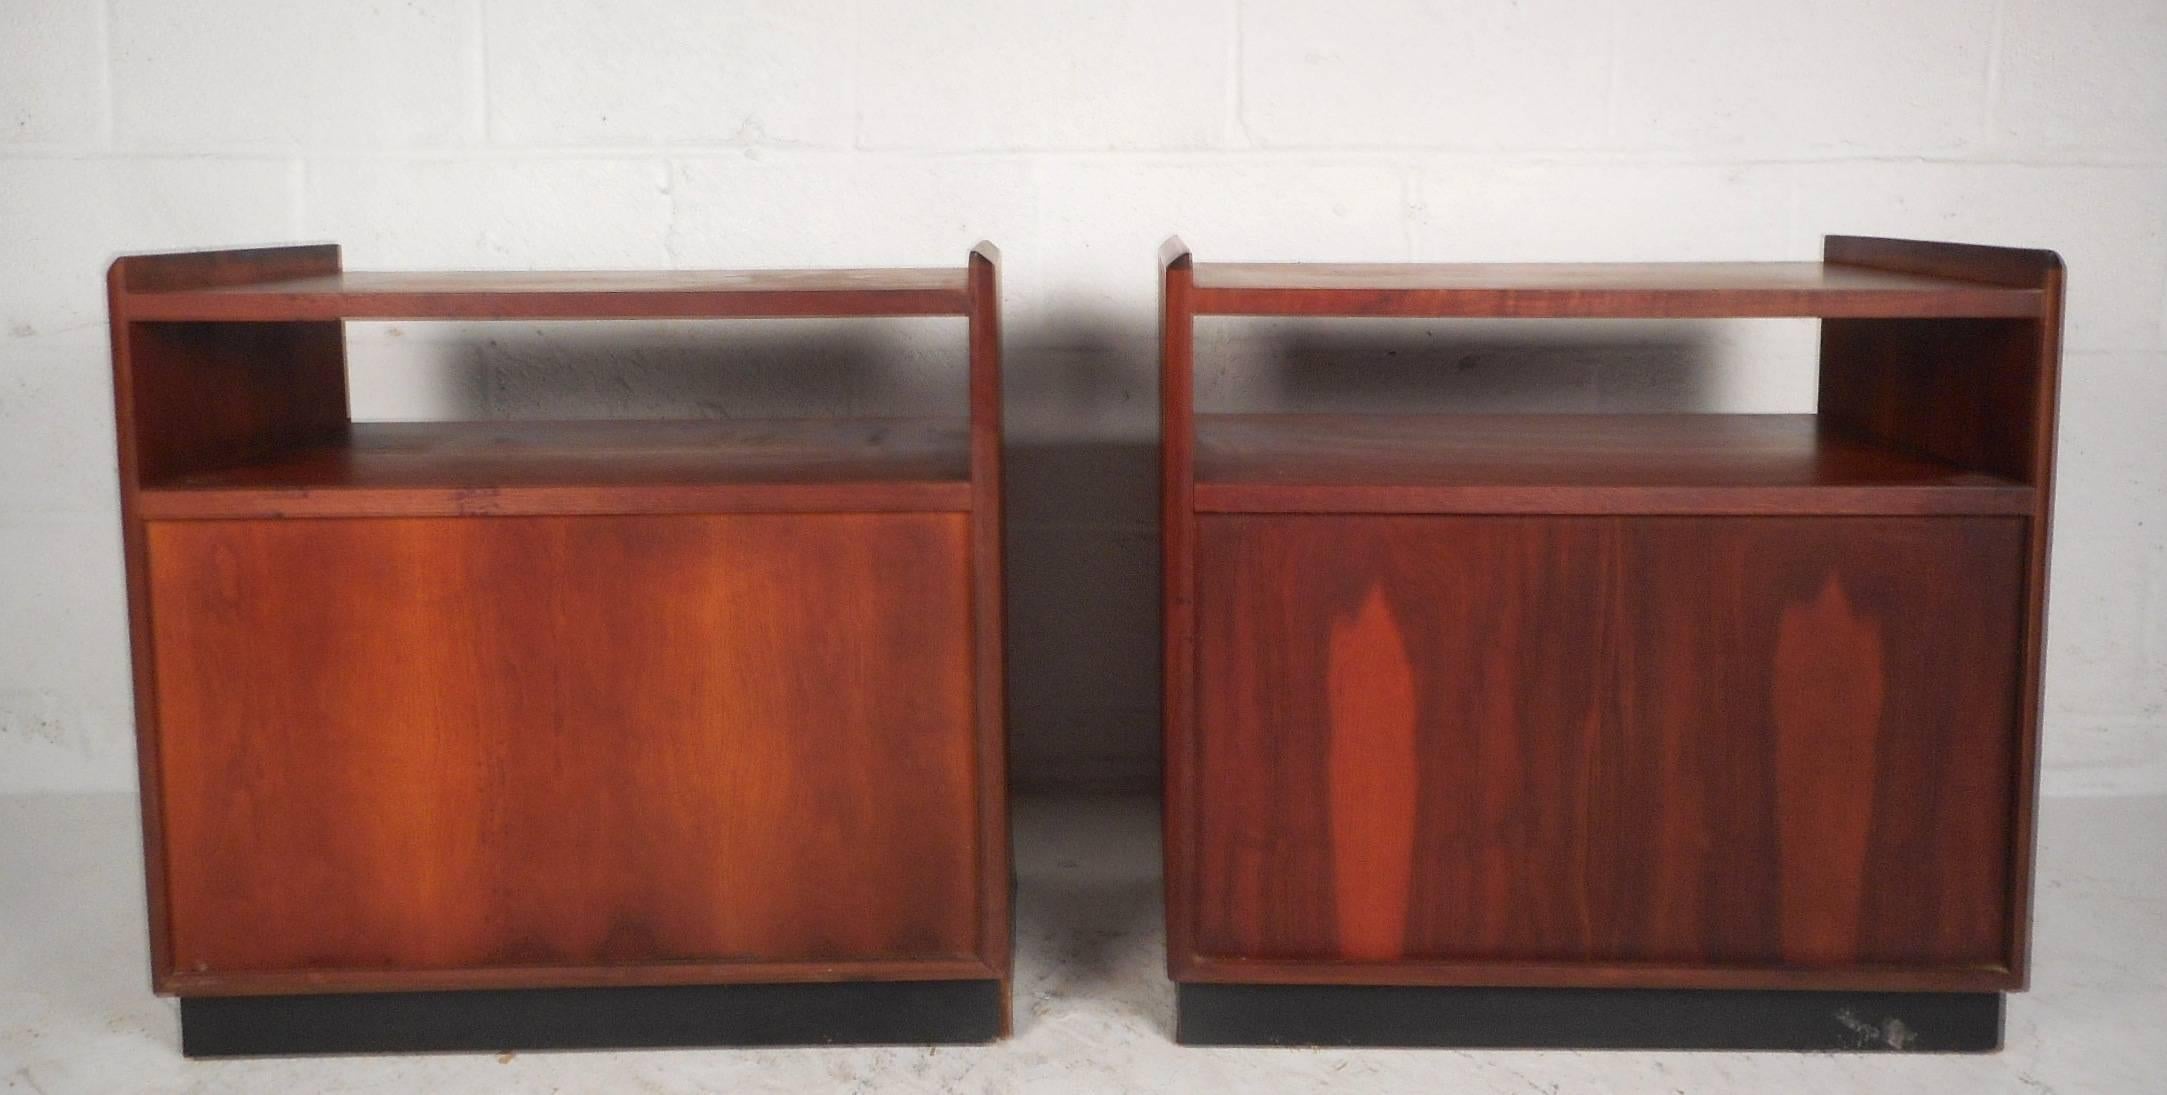 Late 20th Century Pair of Mid-Century Modern Nightstands with a Cane Front